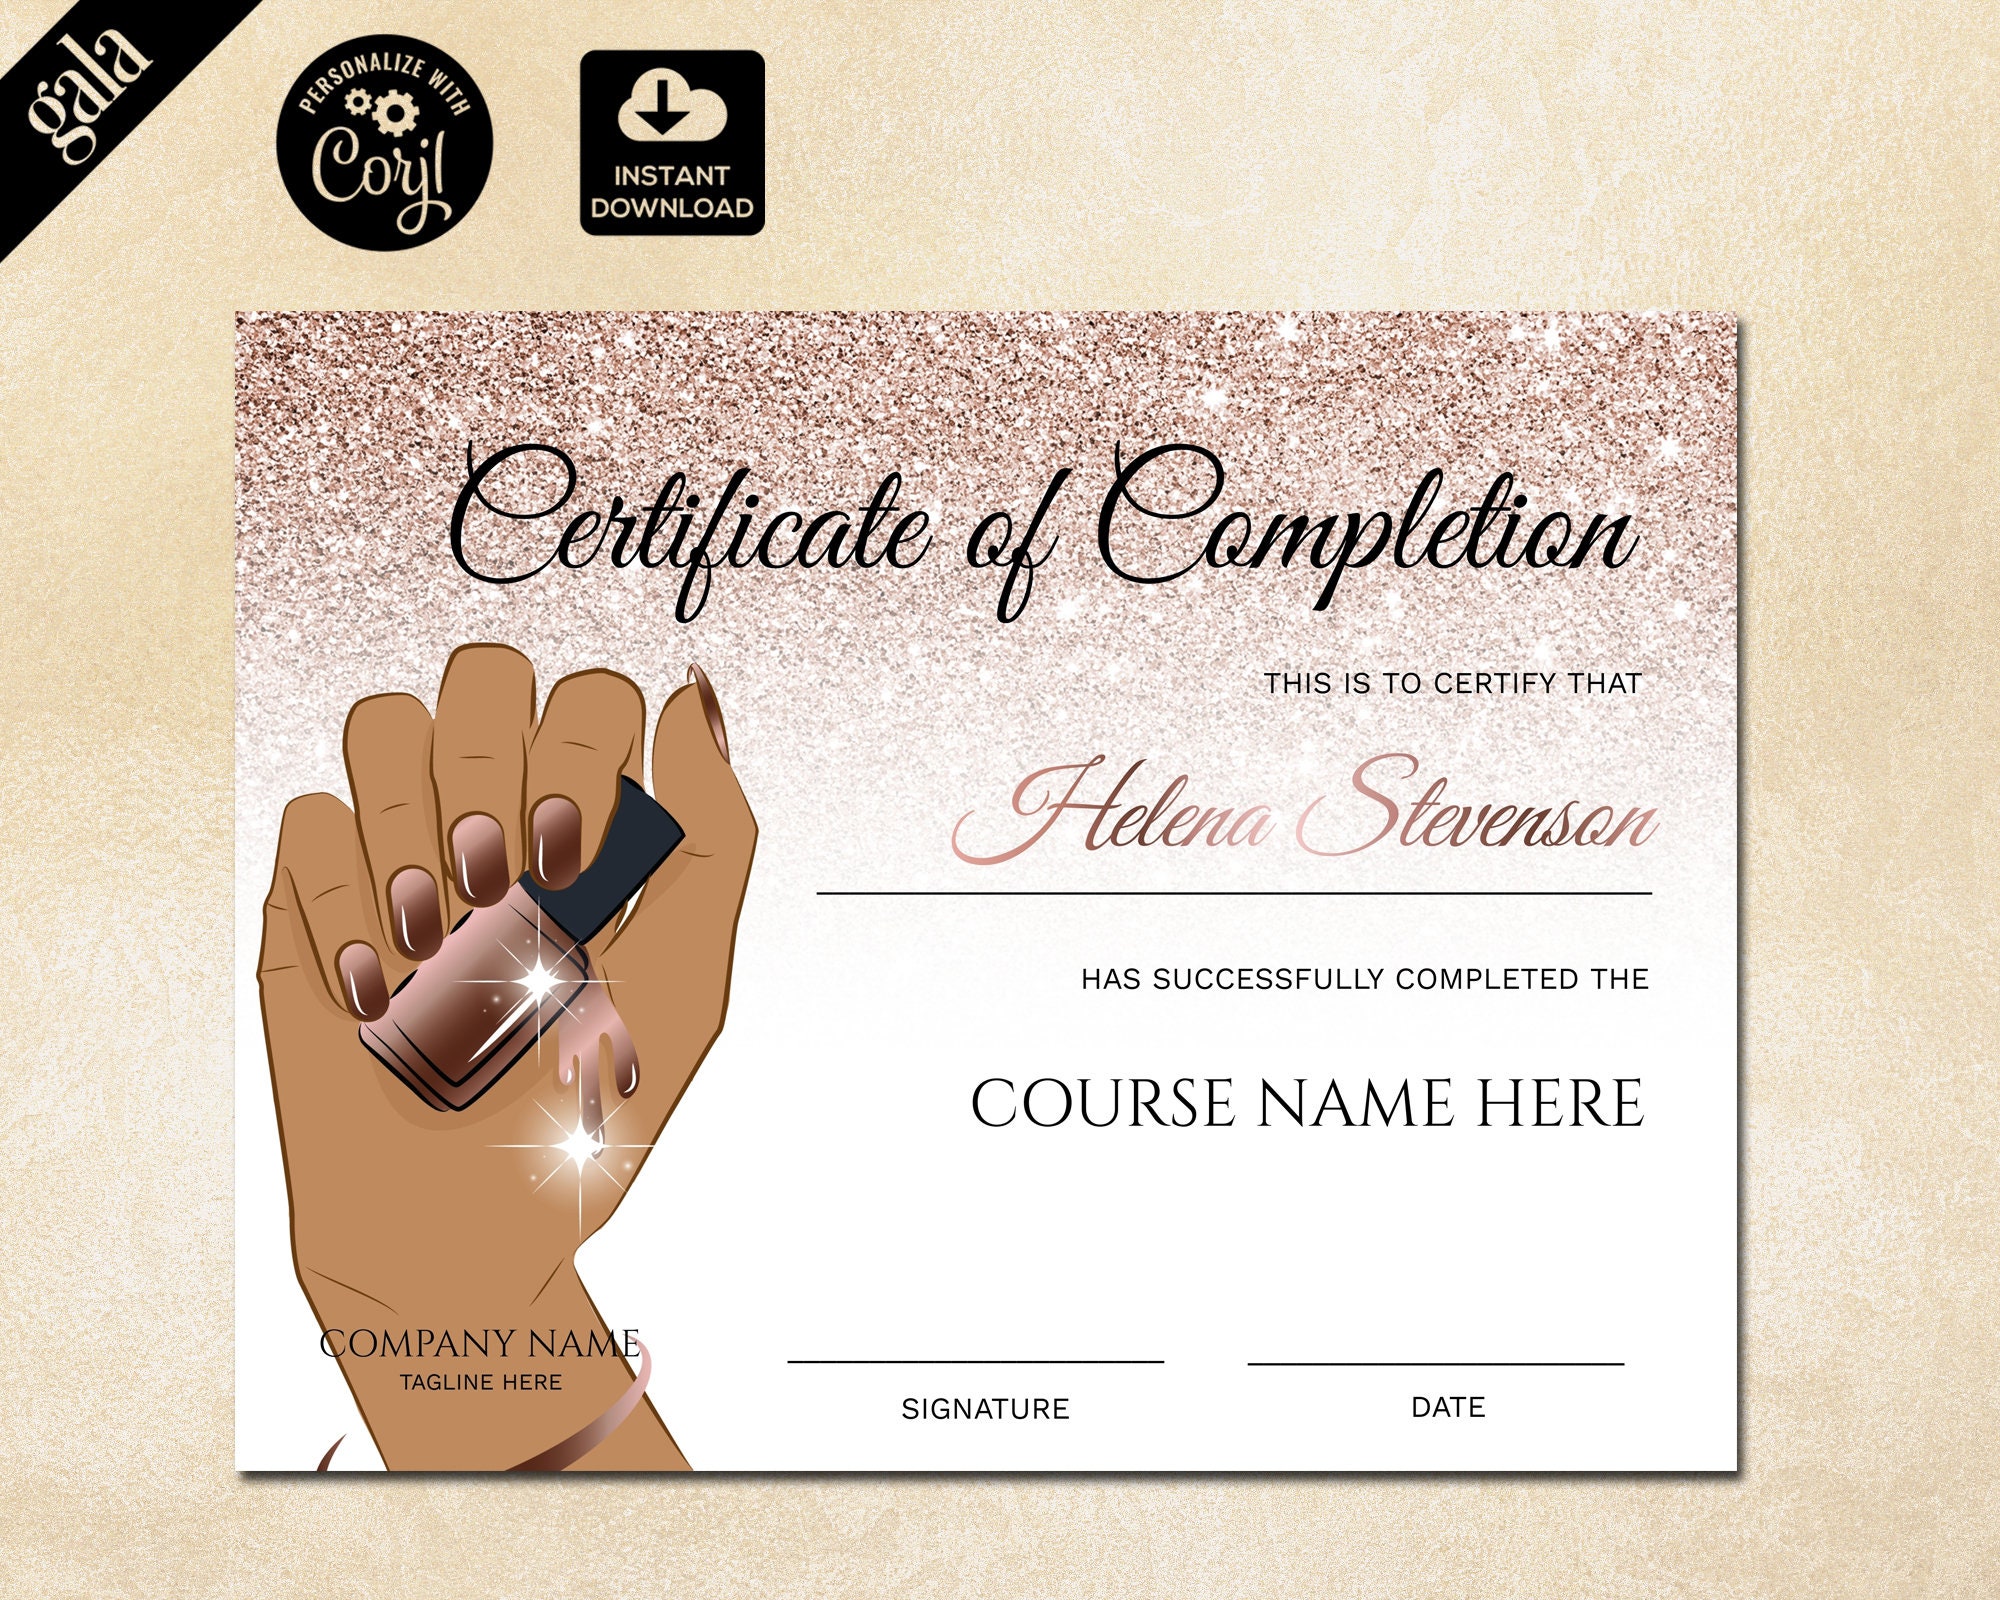 6. Nails & Beauty Academy - Nail Art Certification - wide 5